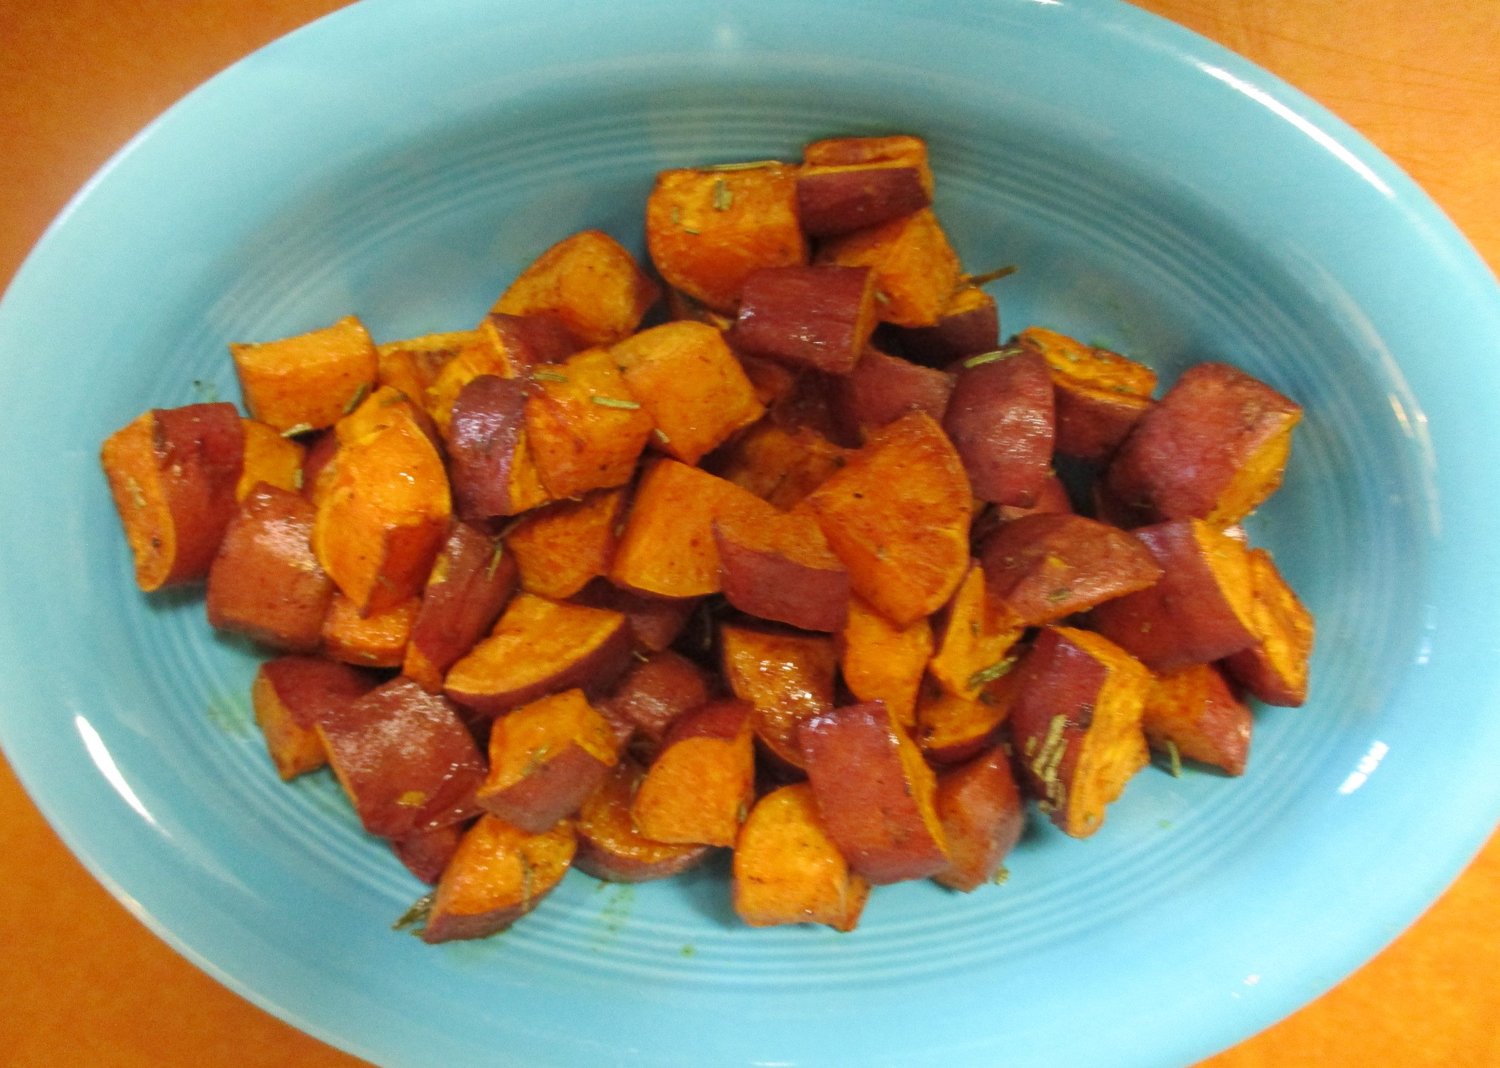 All the fall feels are evident in these roasted sweet potatoes.